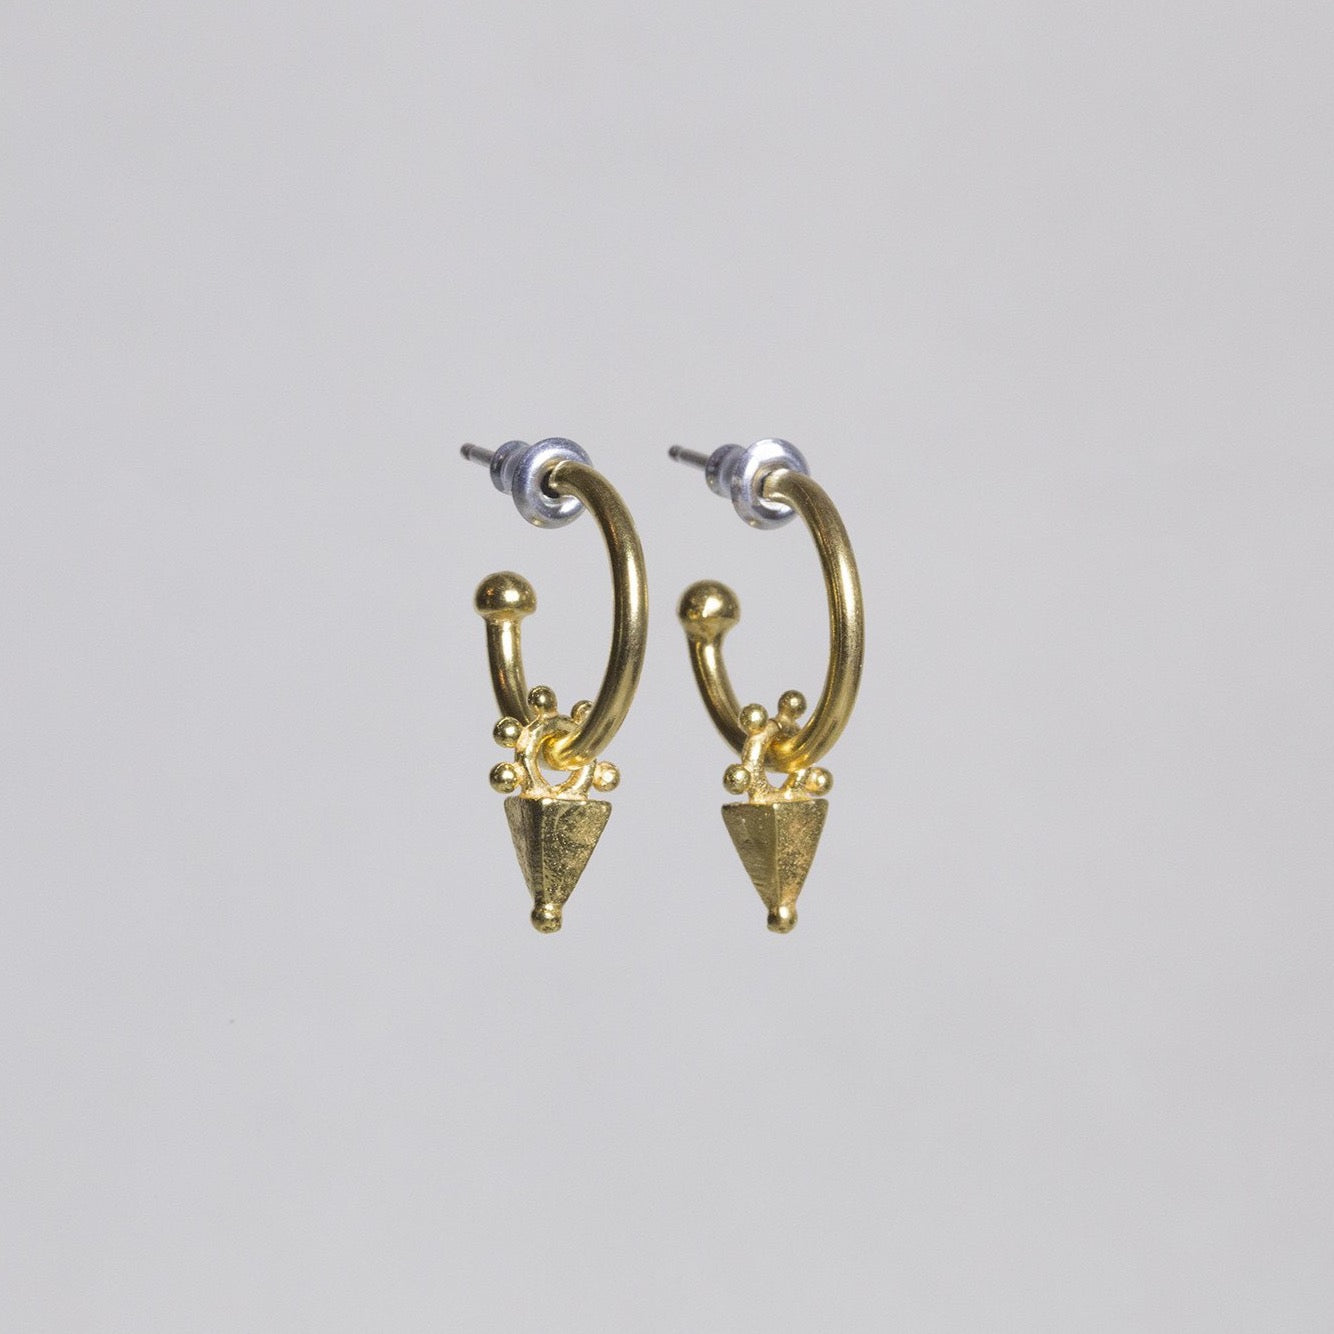 fantastic arrowhead-like charms hang off a hoop, all gold plated, these are a copy of ancient earrings